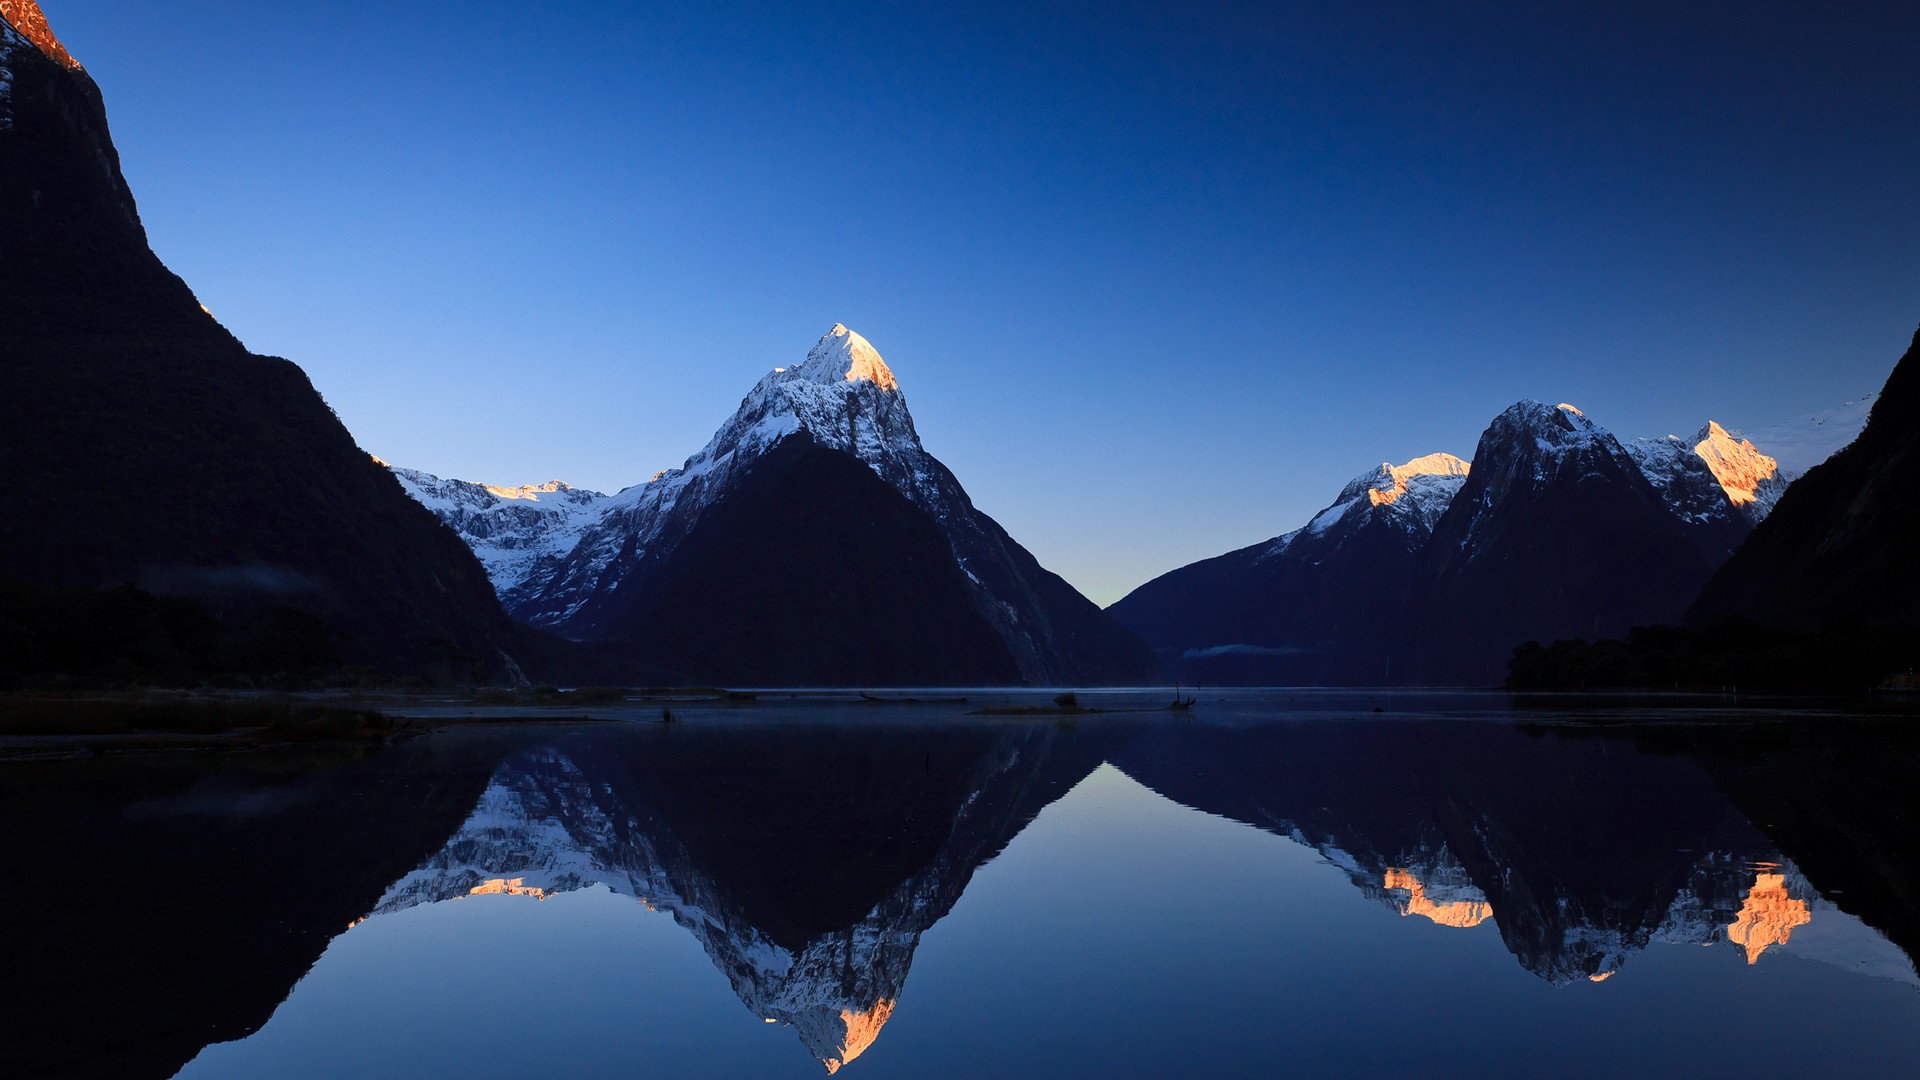 General 1920x1080 mountains Milford Sound New Zealand fjord nature reflection water